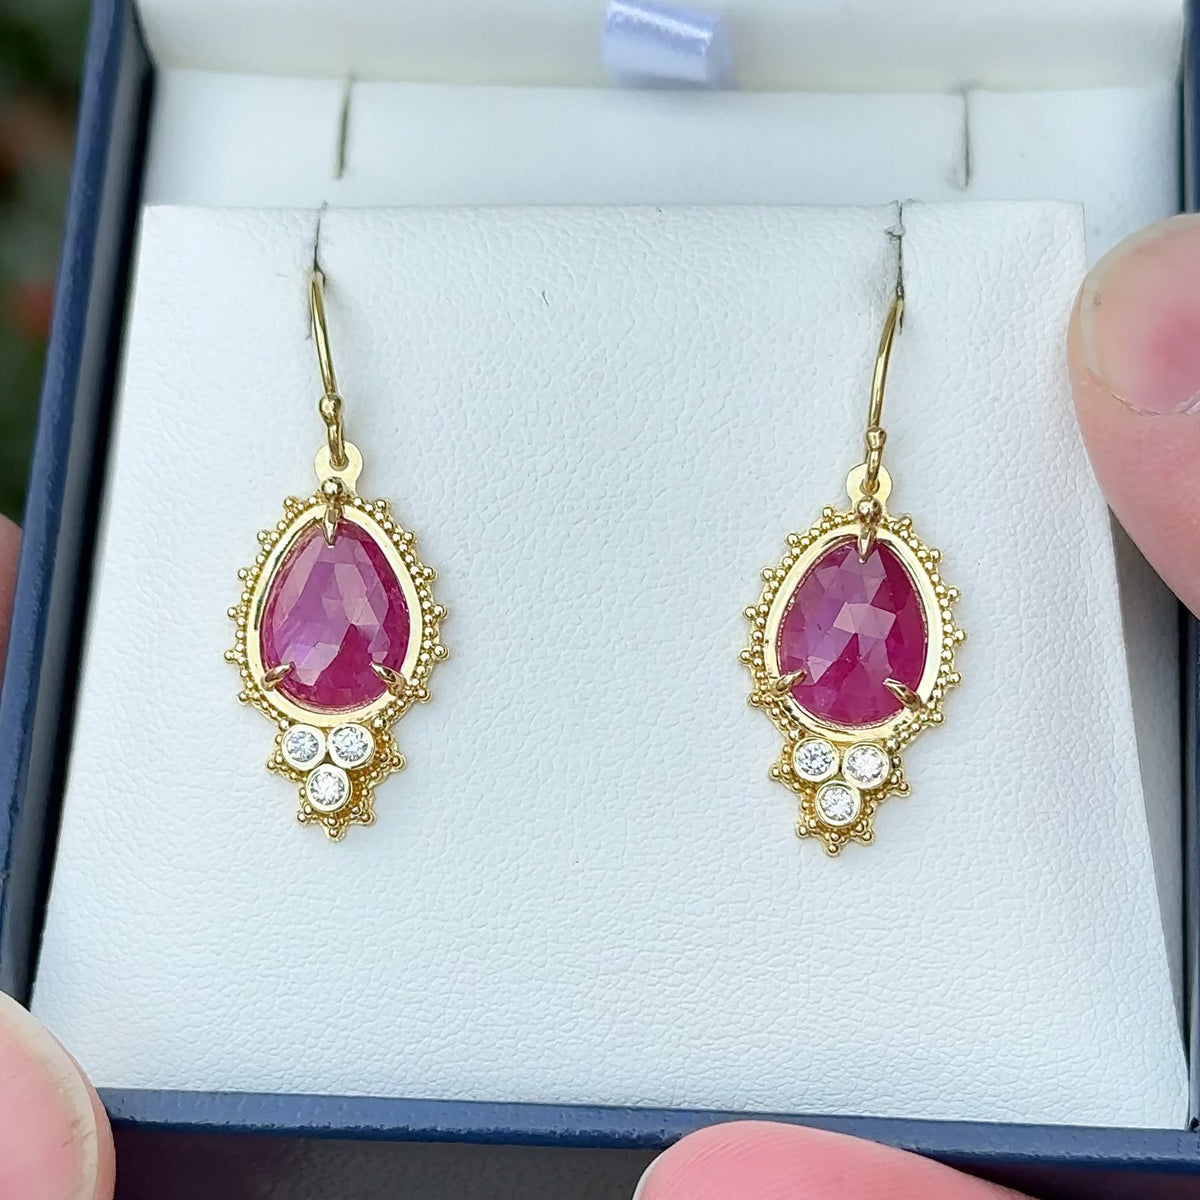 Ruby and diamond earrings in granulated 18K Treasure Gold made with shipwreck treasure